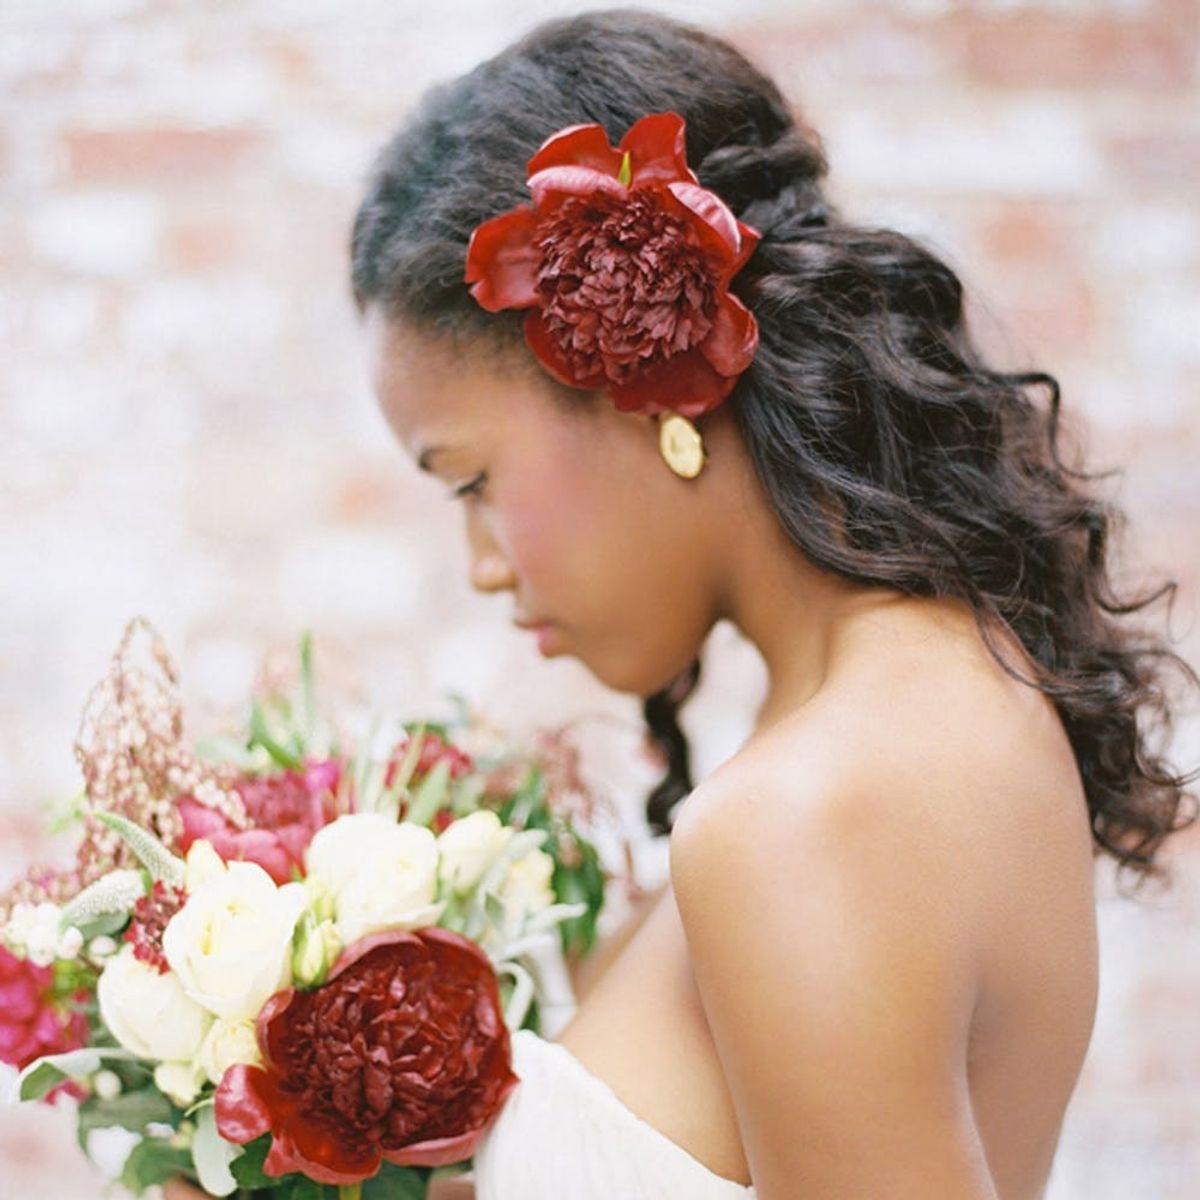 Say “I Do” to These 10 Fresh Spring Wedding Hairstyles